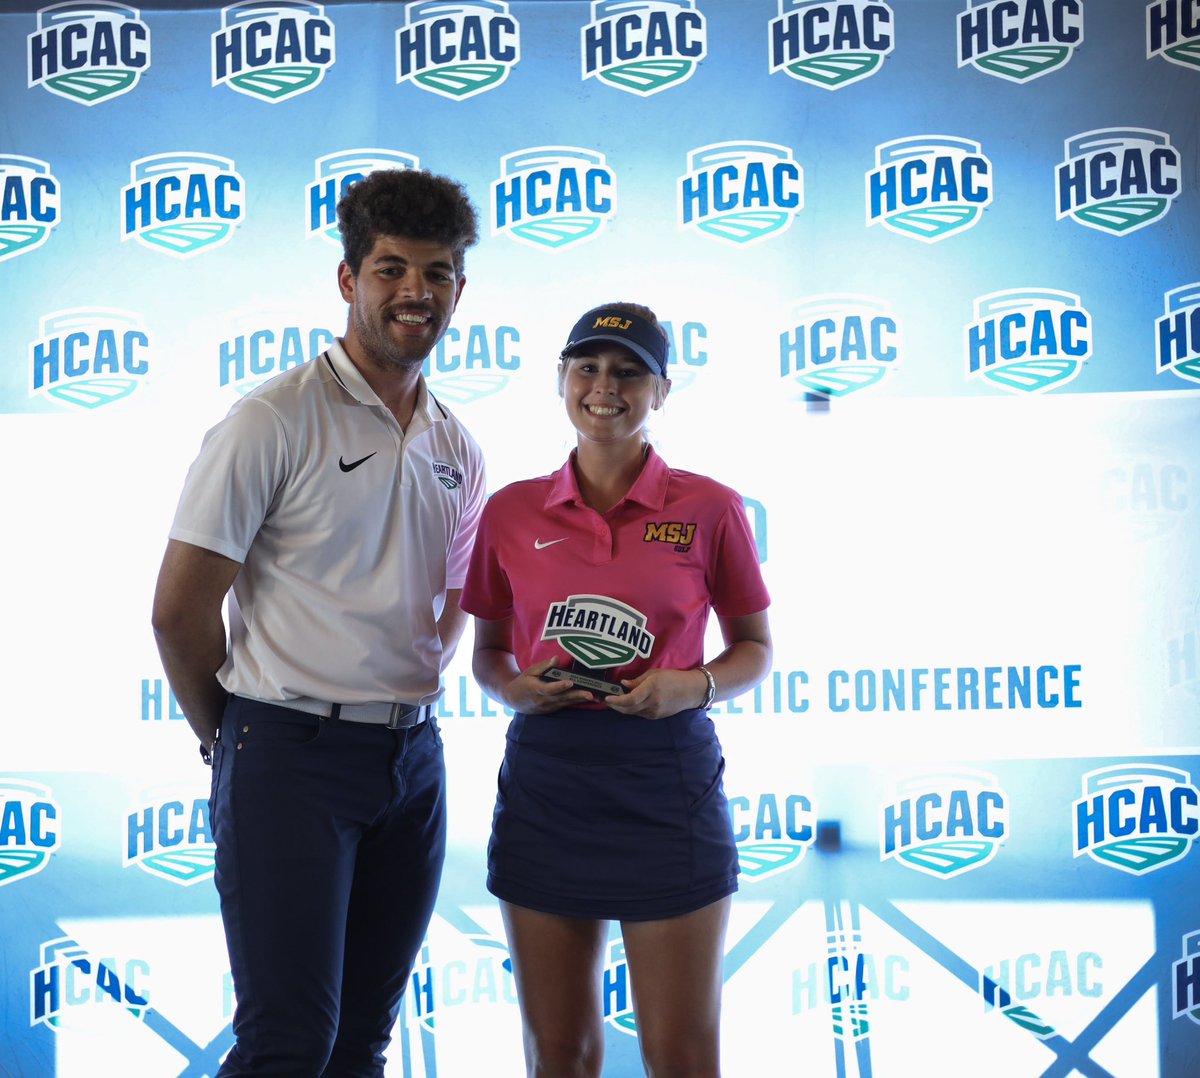 WGOLF| Alyssa Haverstraw finished with a three-round total of 228, good for second place overall in the @HCACDIII women’s golf Championship!